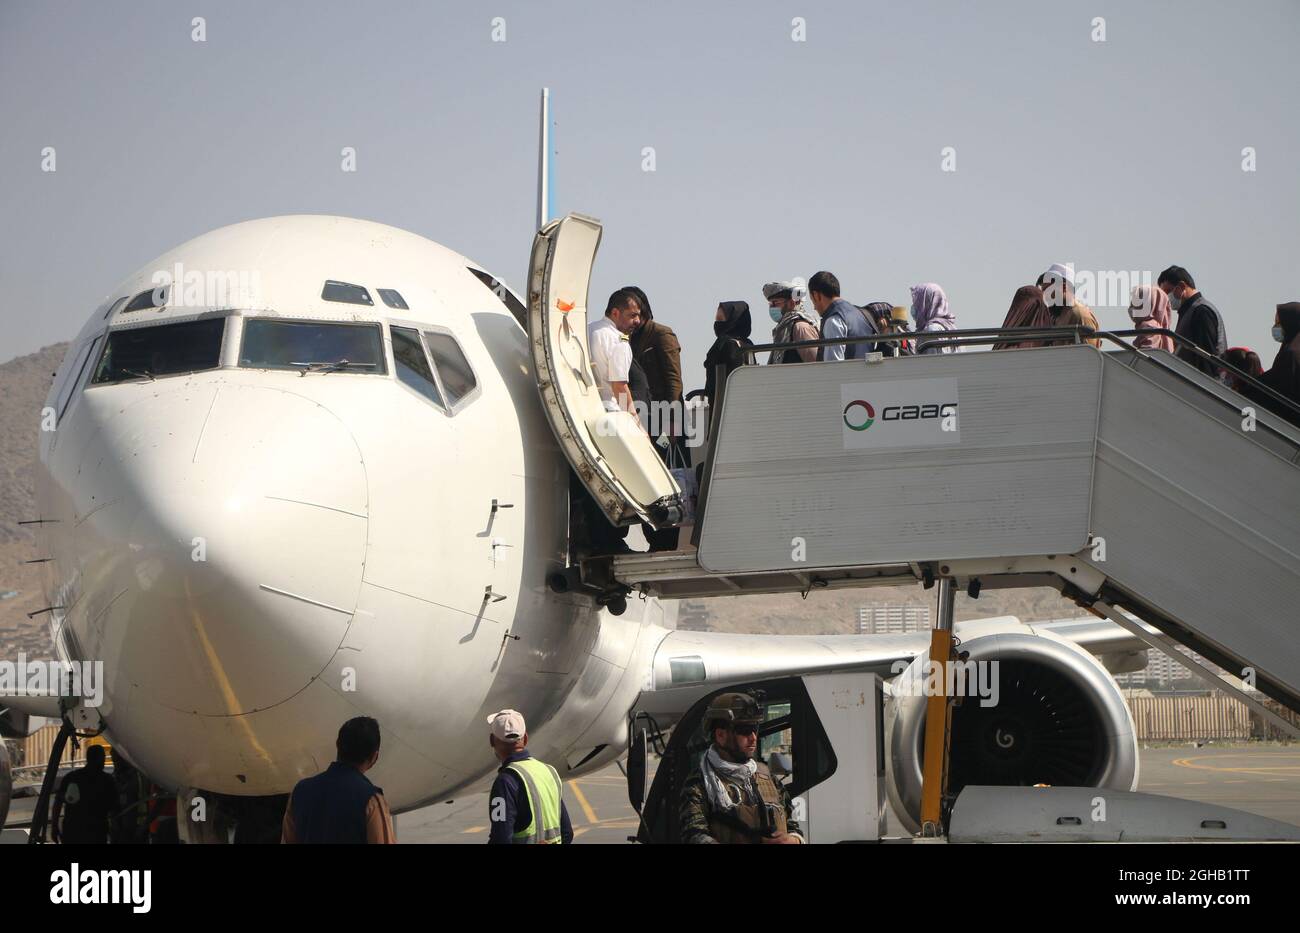 Kabul, Afghanistan. 6th Sep, 2021. Passengers board a plane at the airport in Kabul, capital of Afghanistan, Sept. 6, 2021. Afghanistan's flag carrier airline Ariana Afghan Airlines has resumed domestic flights, a local television channel reported Sunday. Credit: Saifurahman Safi/Xinhua/Alamy Live News Stock Photo